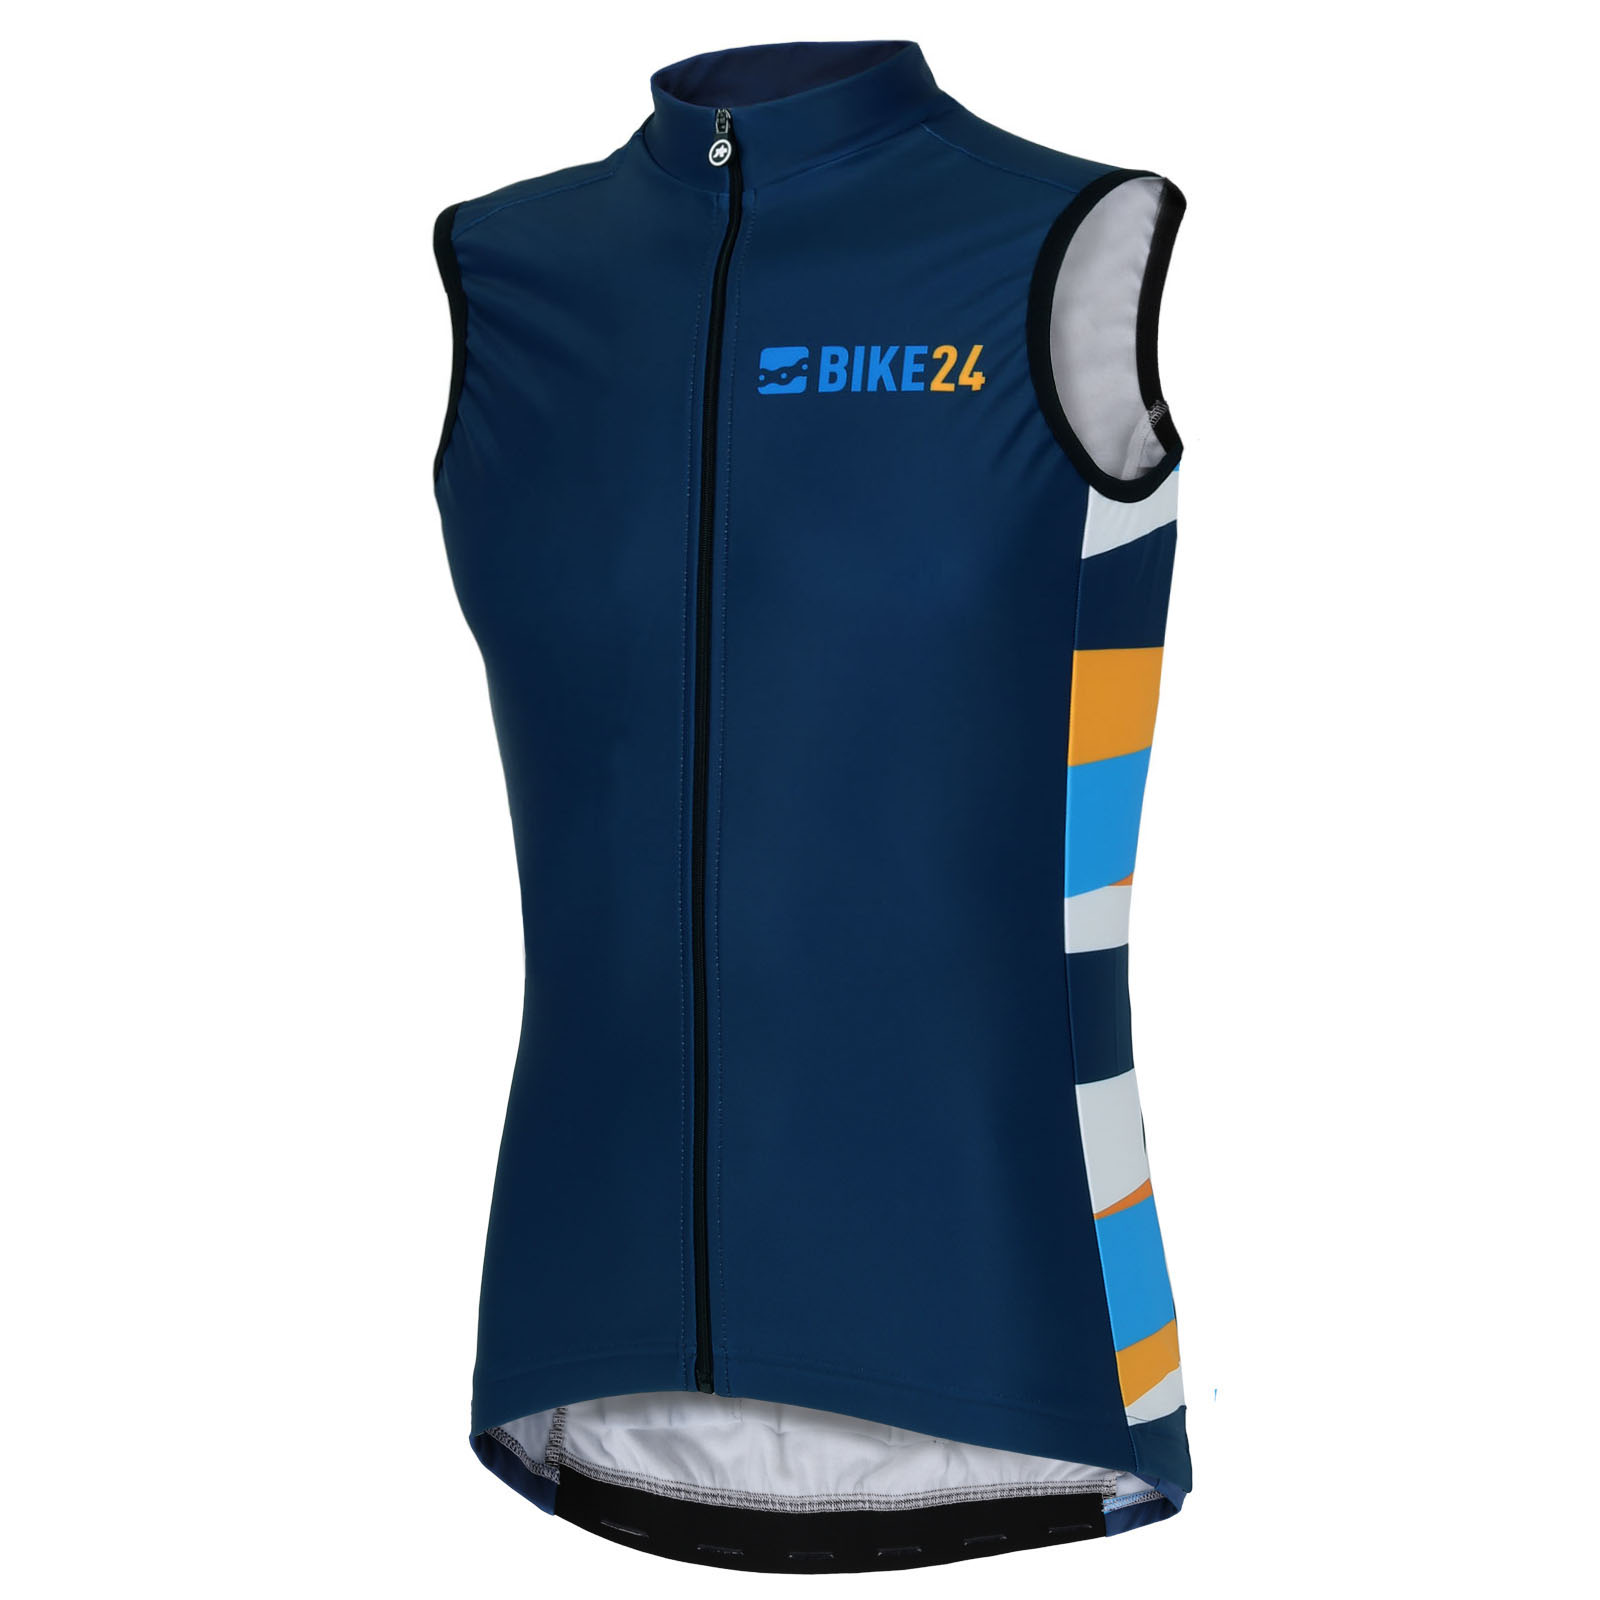 Picture of Assos x BIKE24 Edition Cycling Vest PCR.1 - blue